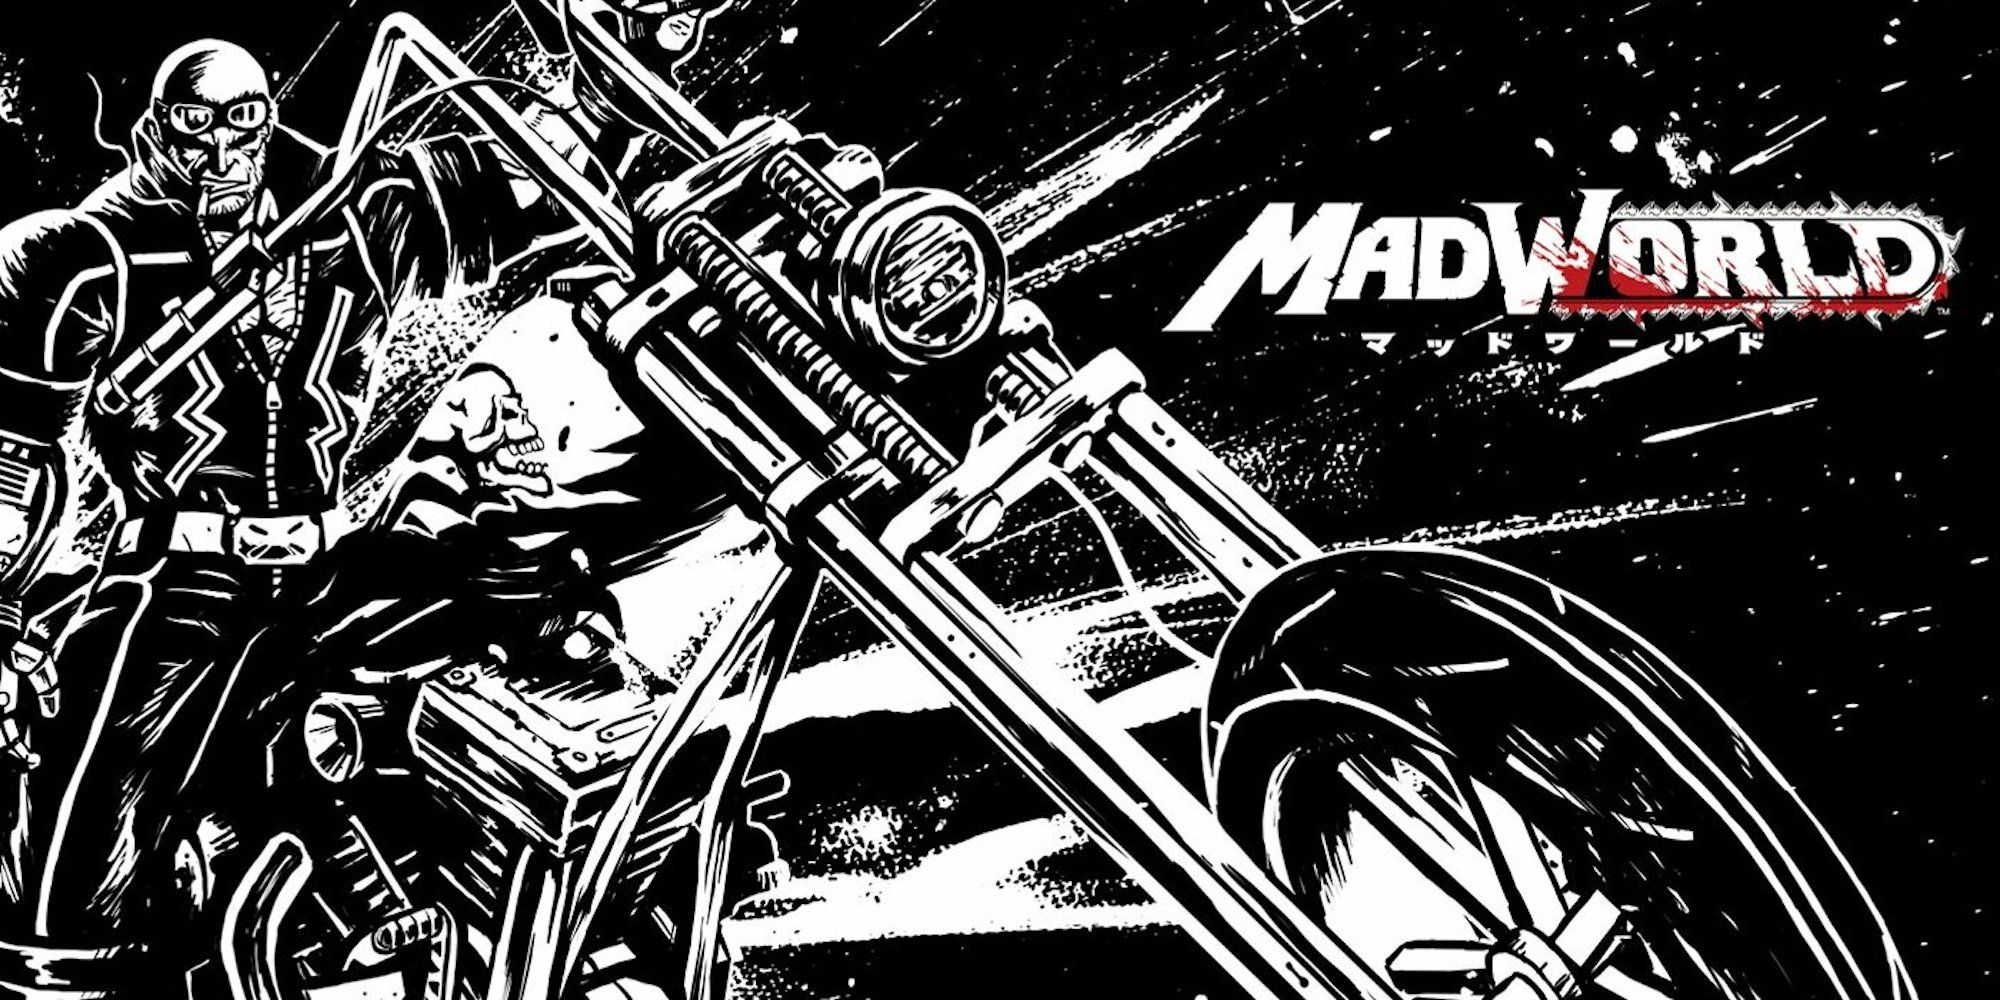 Promotional art featuring Jack Cayman in Madworld